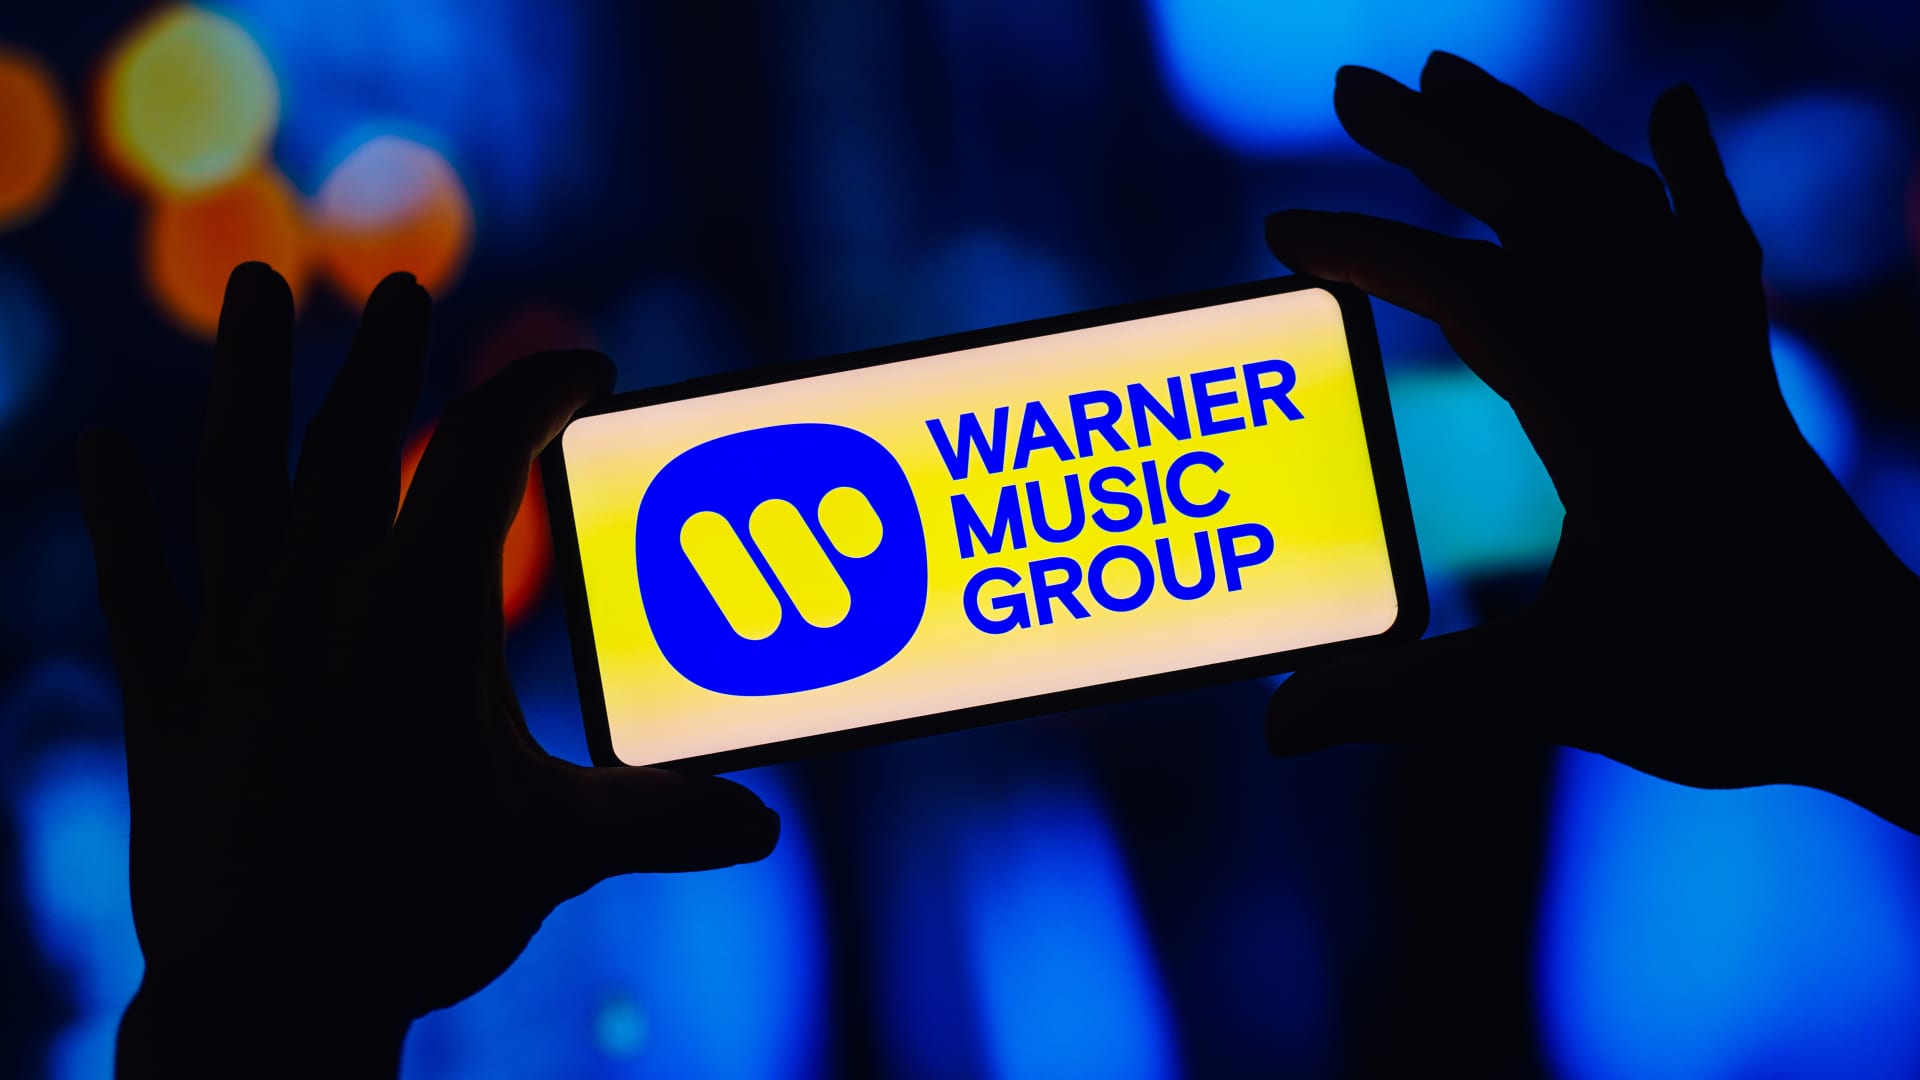 Warner Music to cut 600 jobs, or 10% of staff